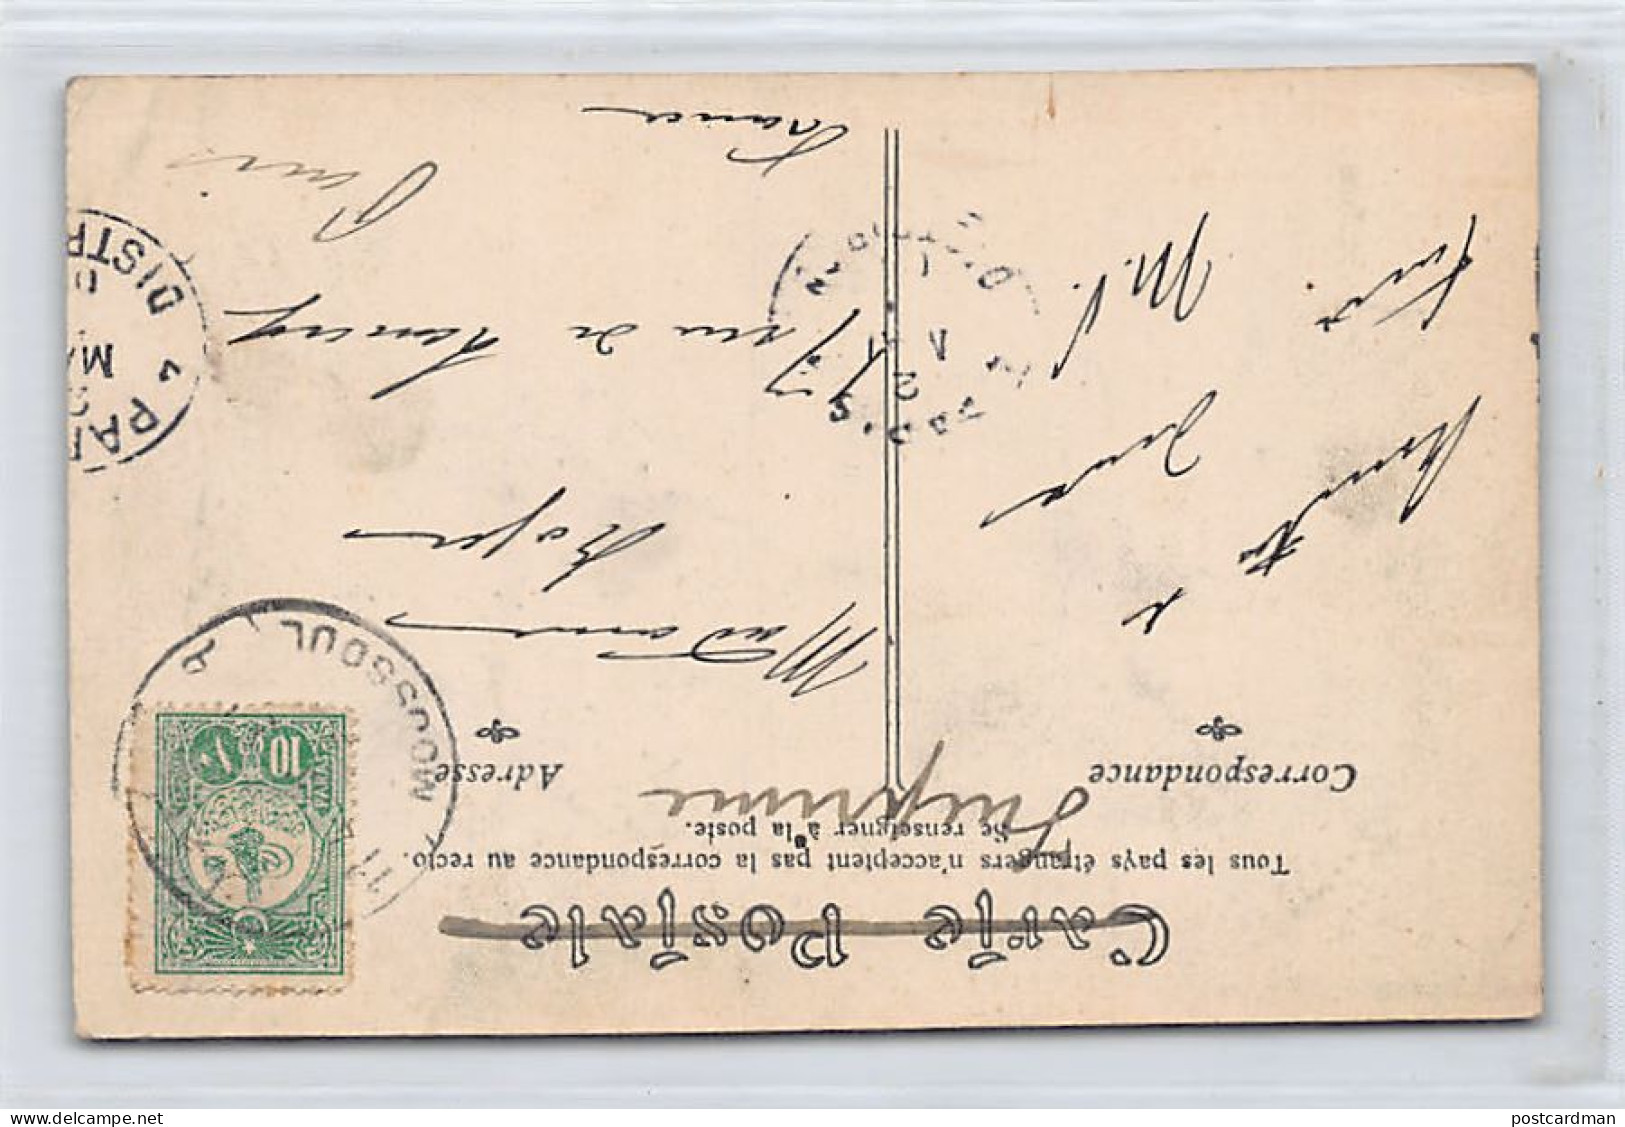 Iraq - MOSUL - The Tigris River - SEE STAMP AND POSTMARK - Publ. Unknown  - Irak